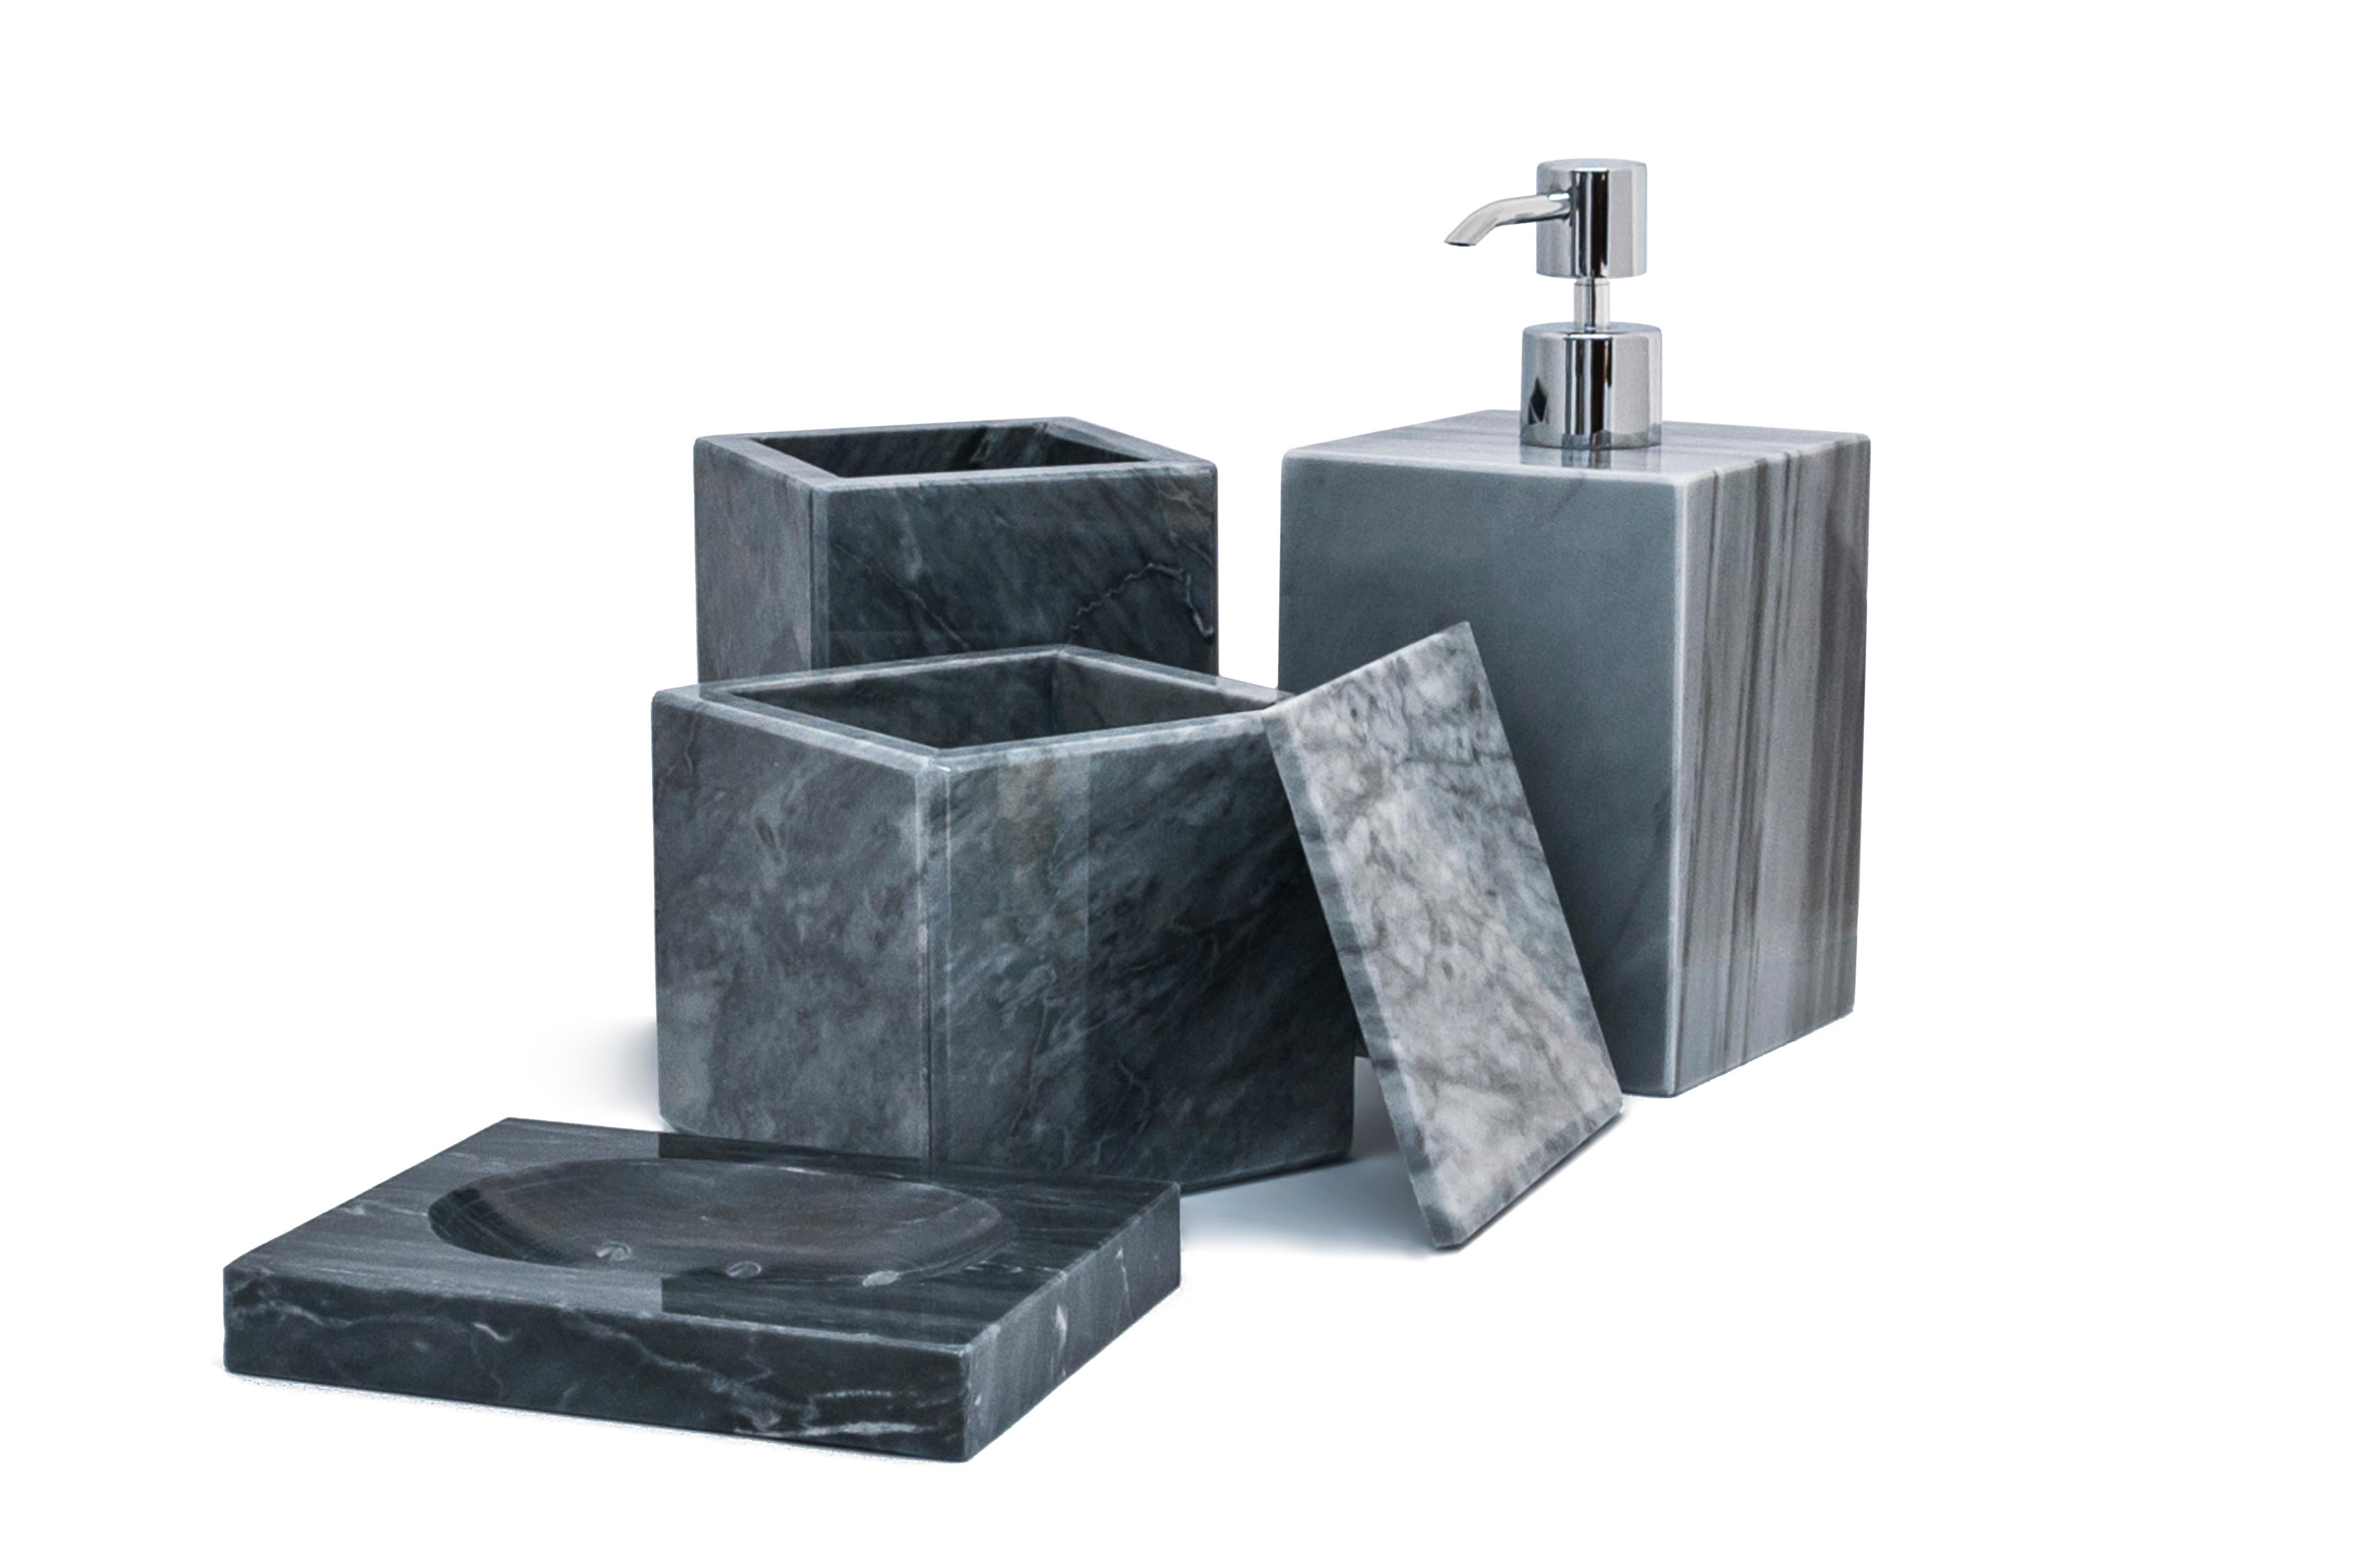 A squared shape toothbrush holder in grey Bardiglio marble.
Each piece is in a way unique (since each marble block is different in veins and shades) and handcrafted in Italy. Slight variations in shape, color and size are to be considered a